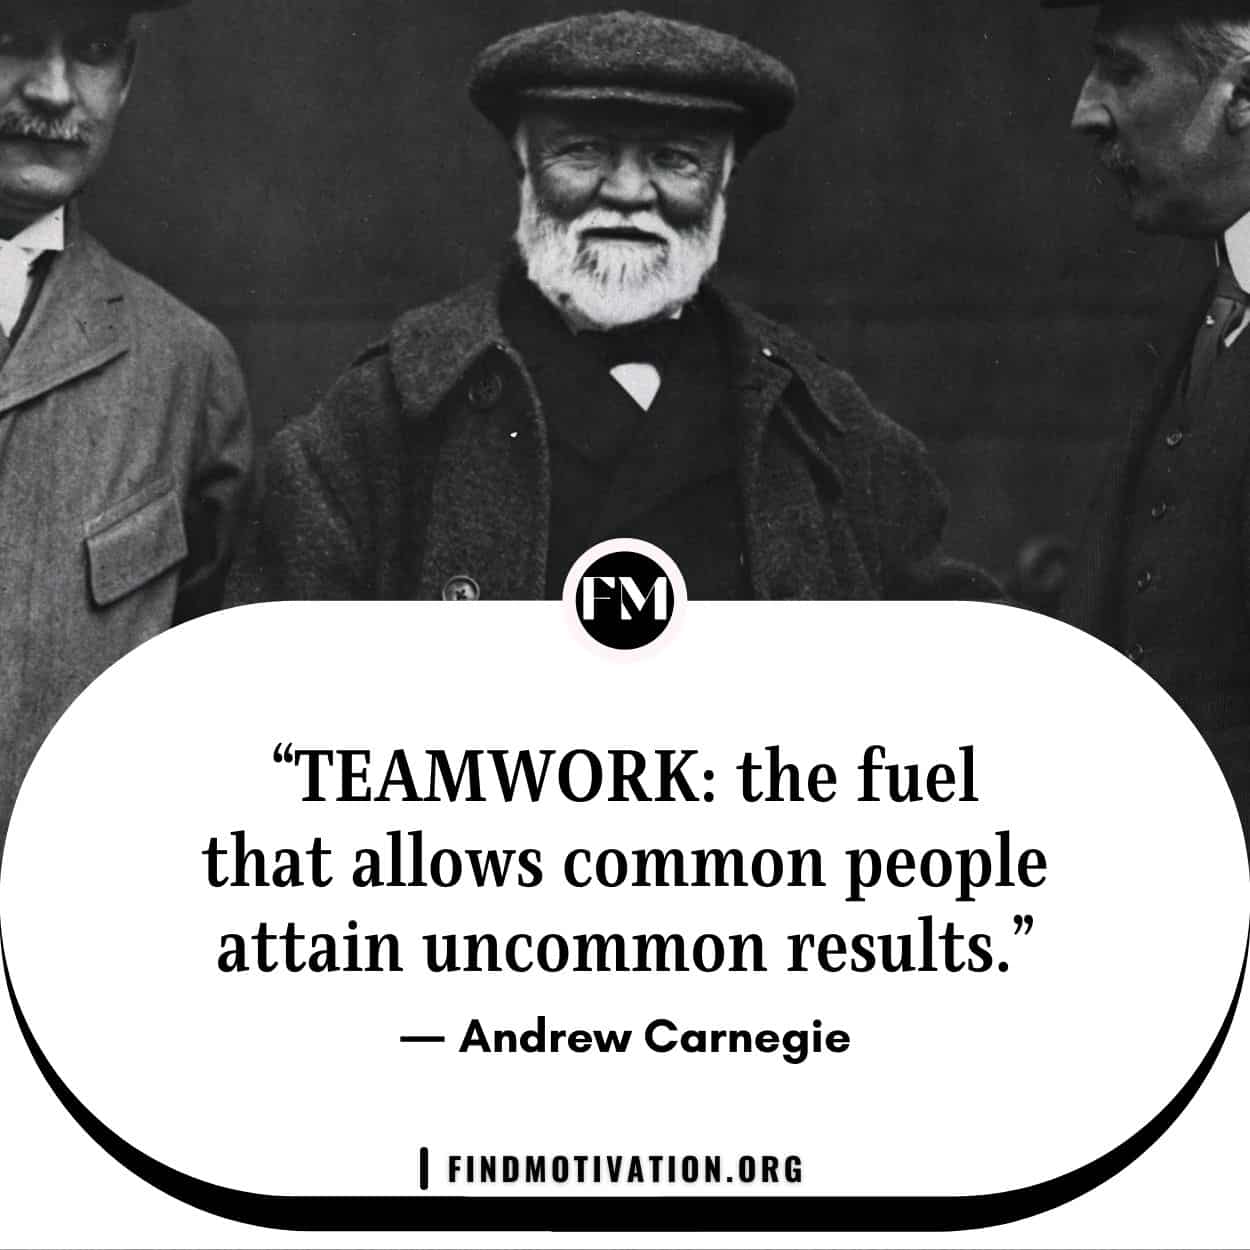 Andrew Carnegie Inspiring Quotes to aim higher in your life